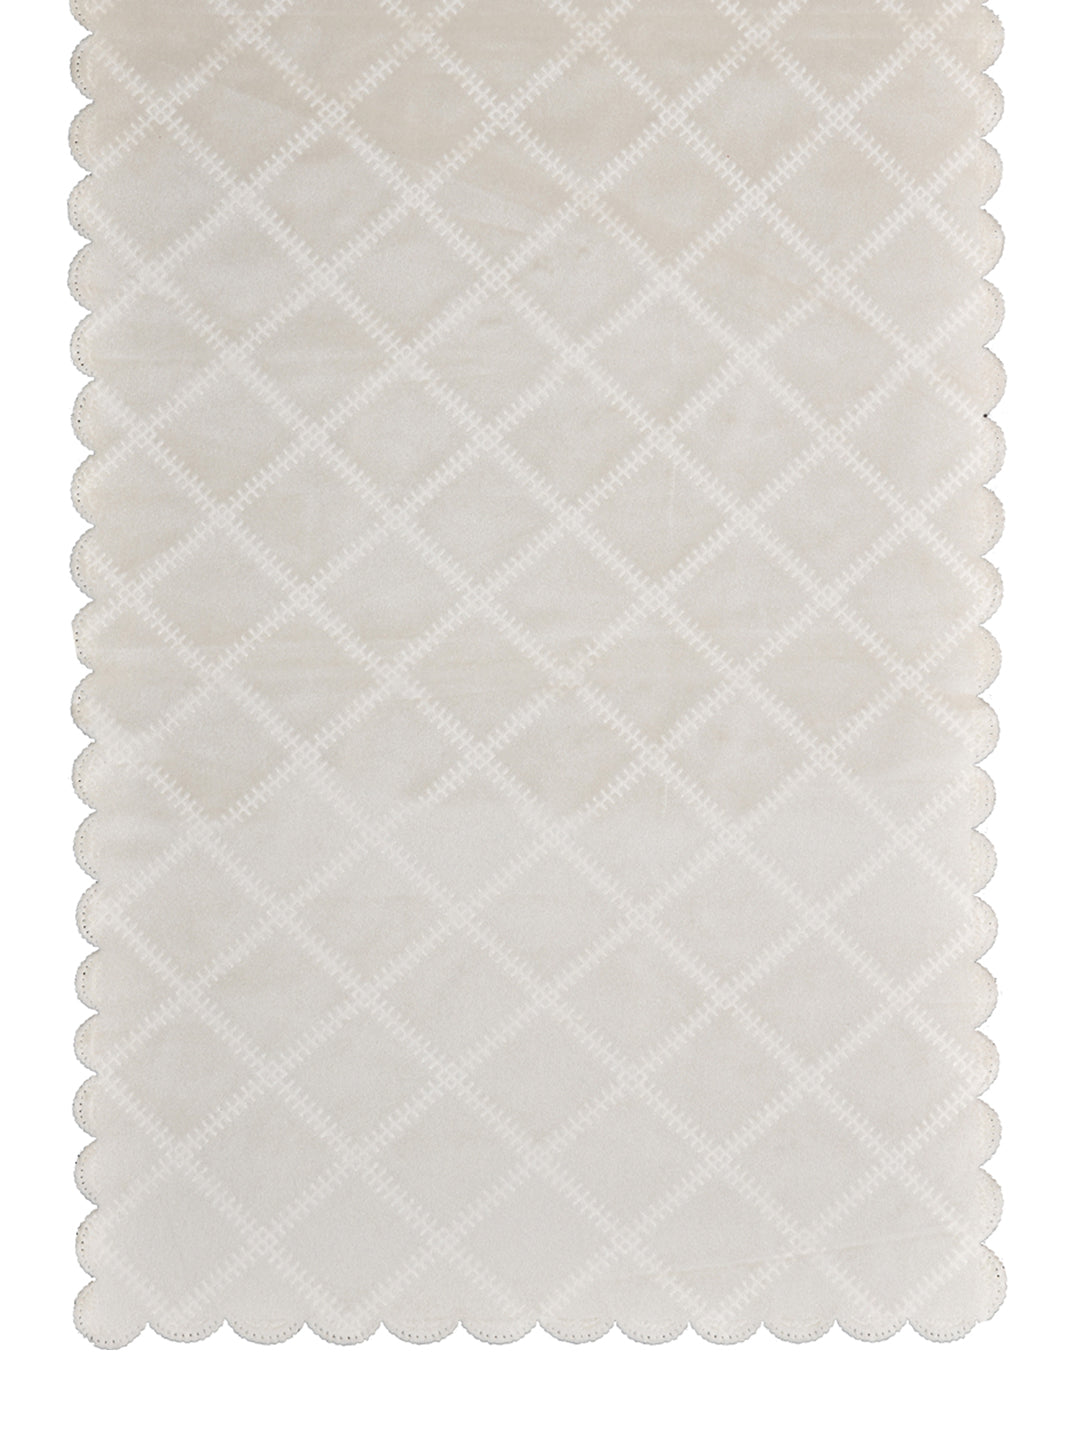 Table Runner; 15x72 Inches; Quilted White